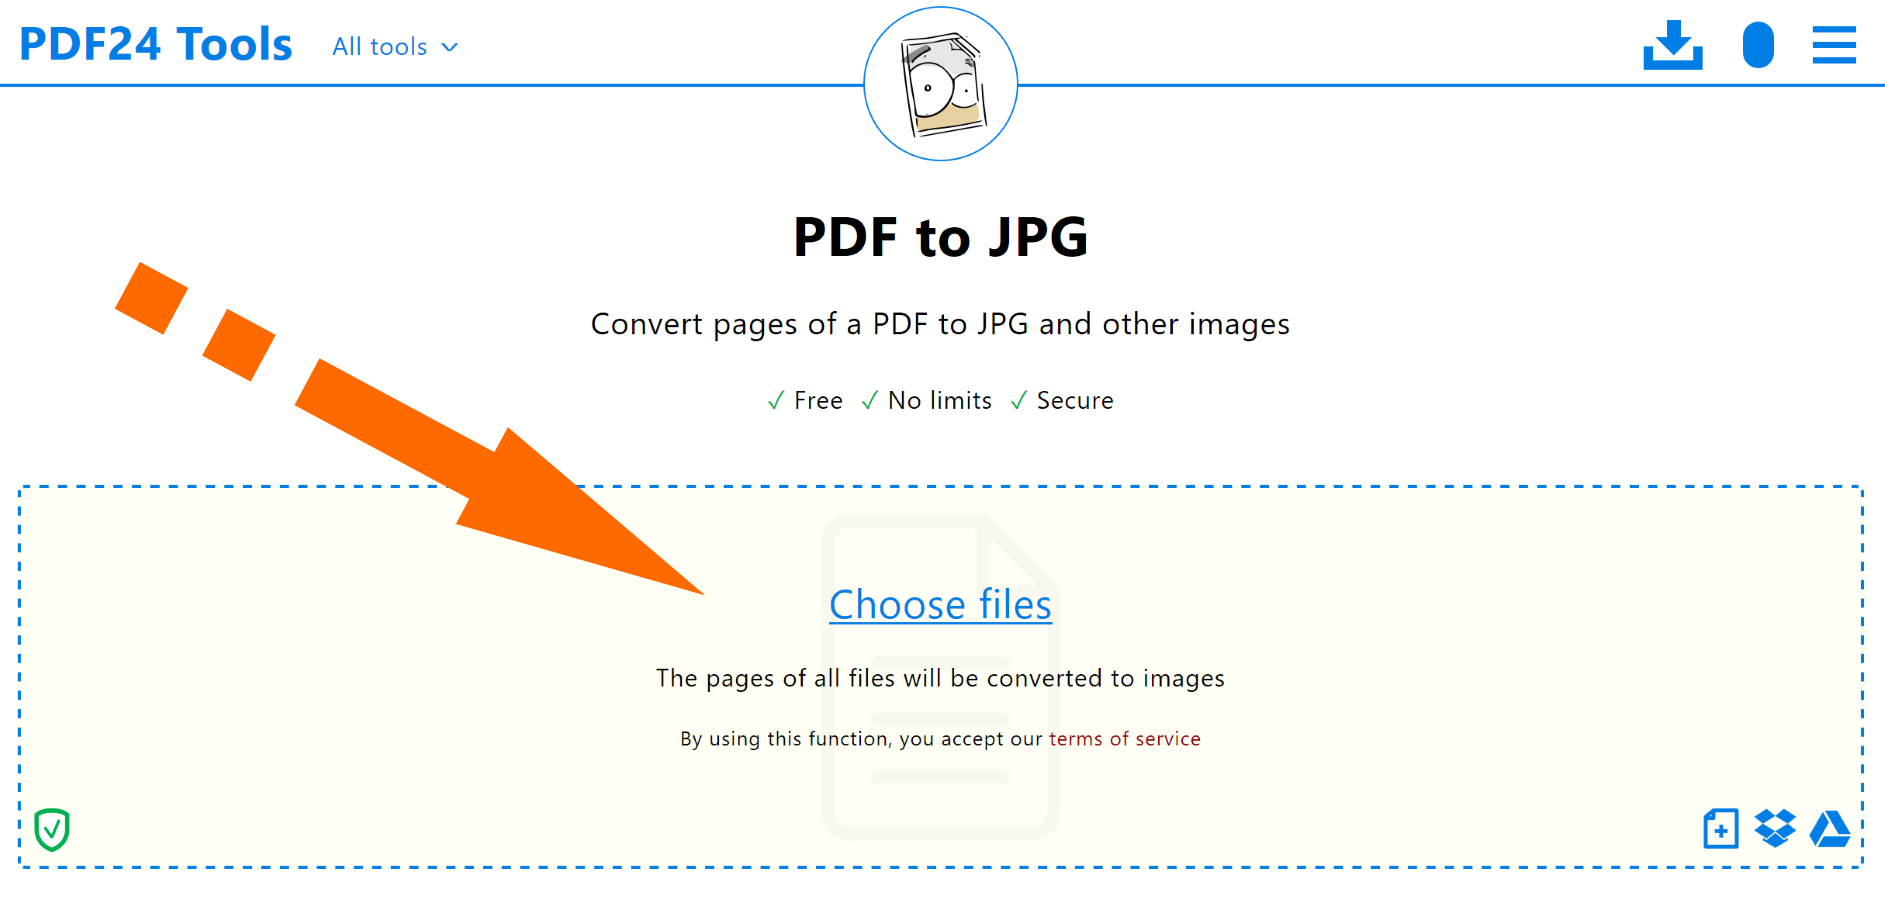 Pdf To Images Converter - Quickly, Online, Free - Pdf24 Tools